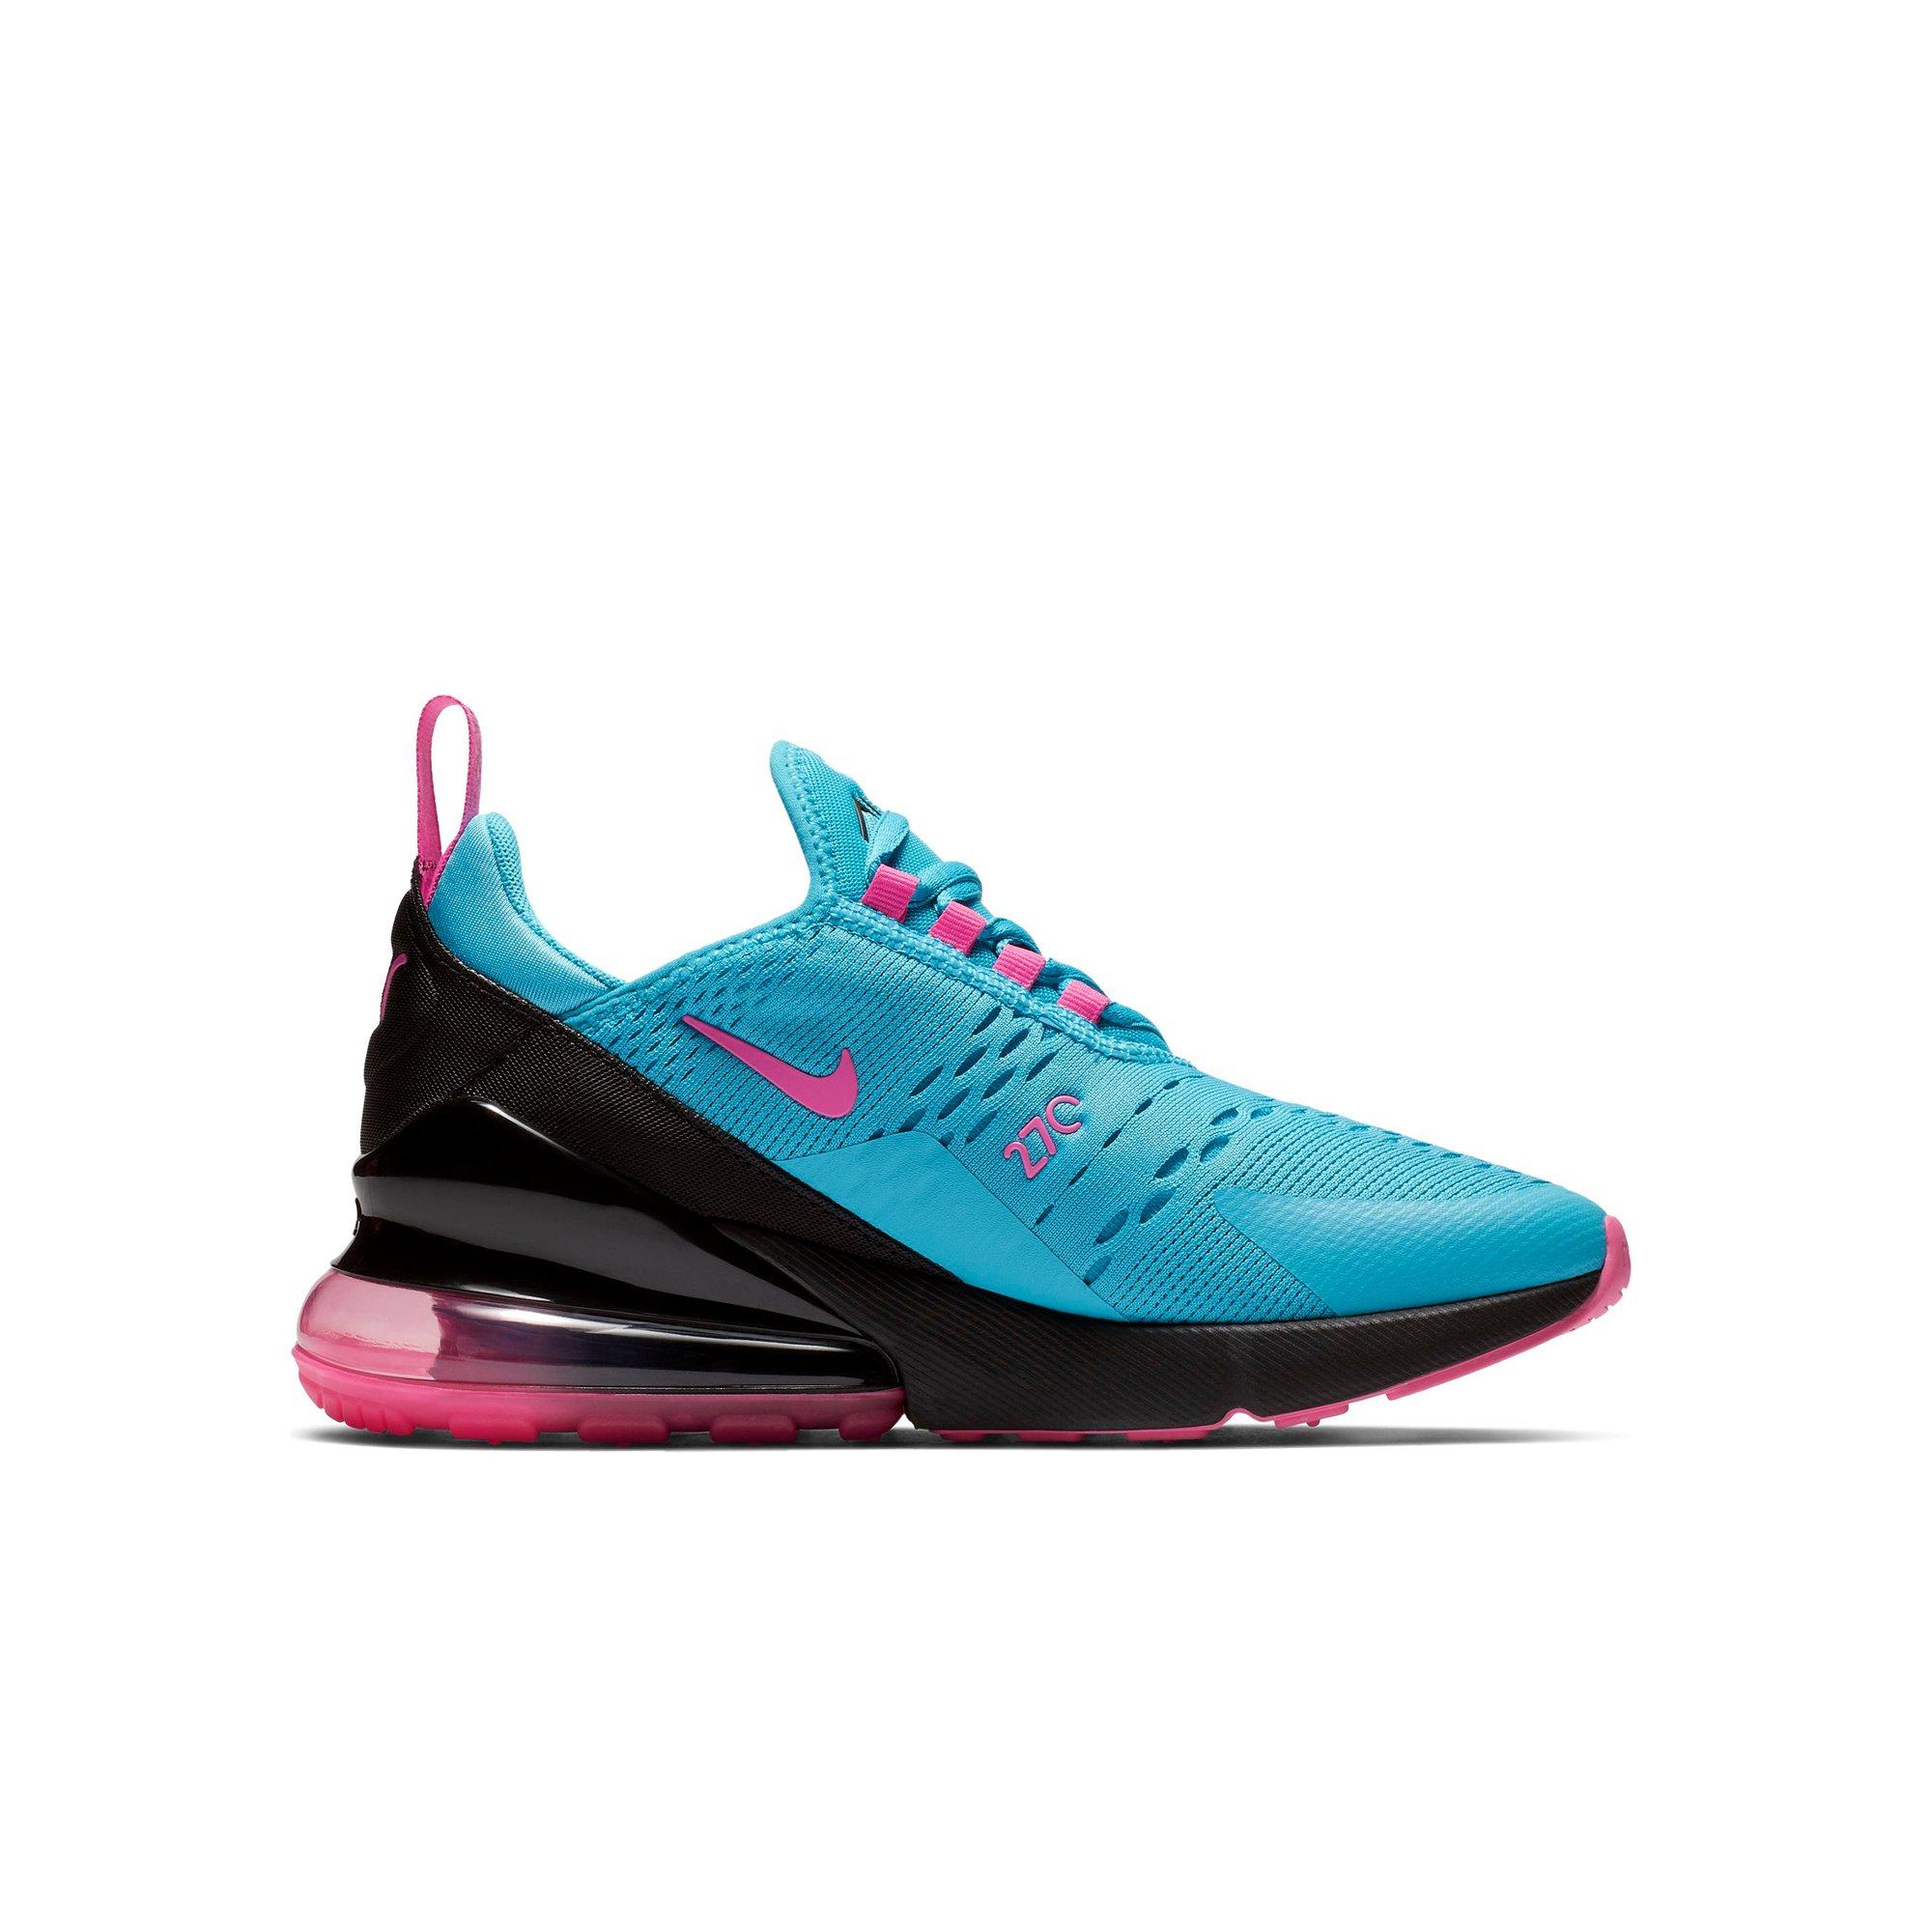 air max 270 turquoise and pink